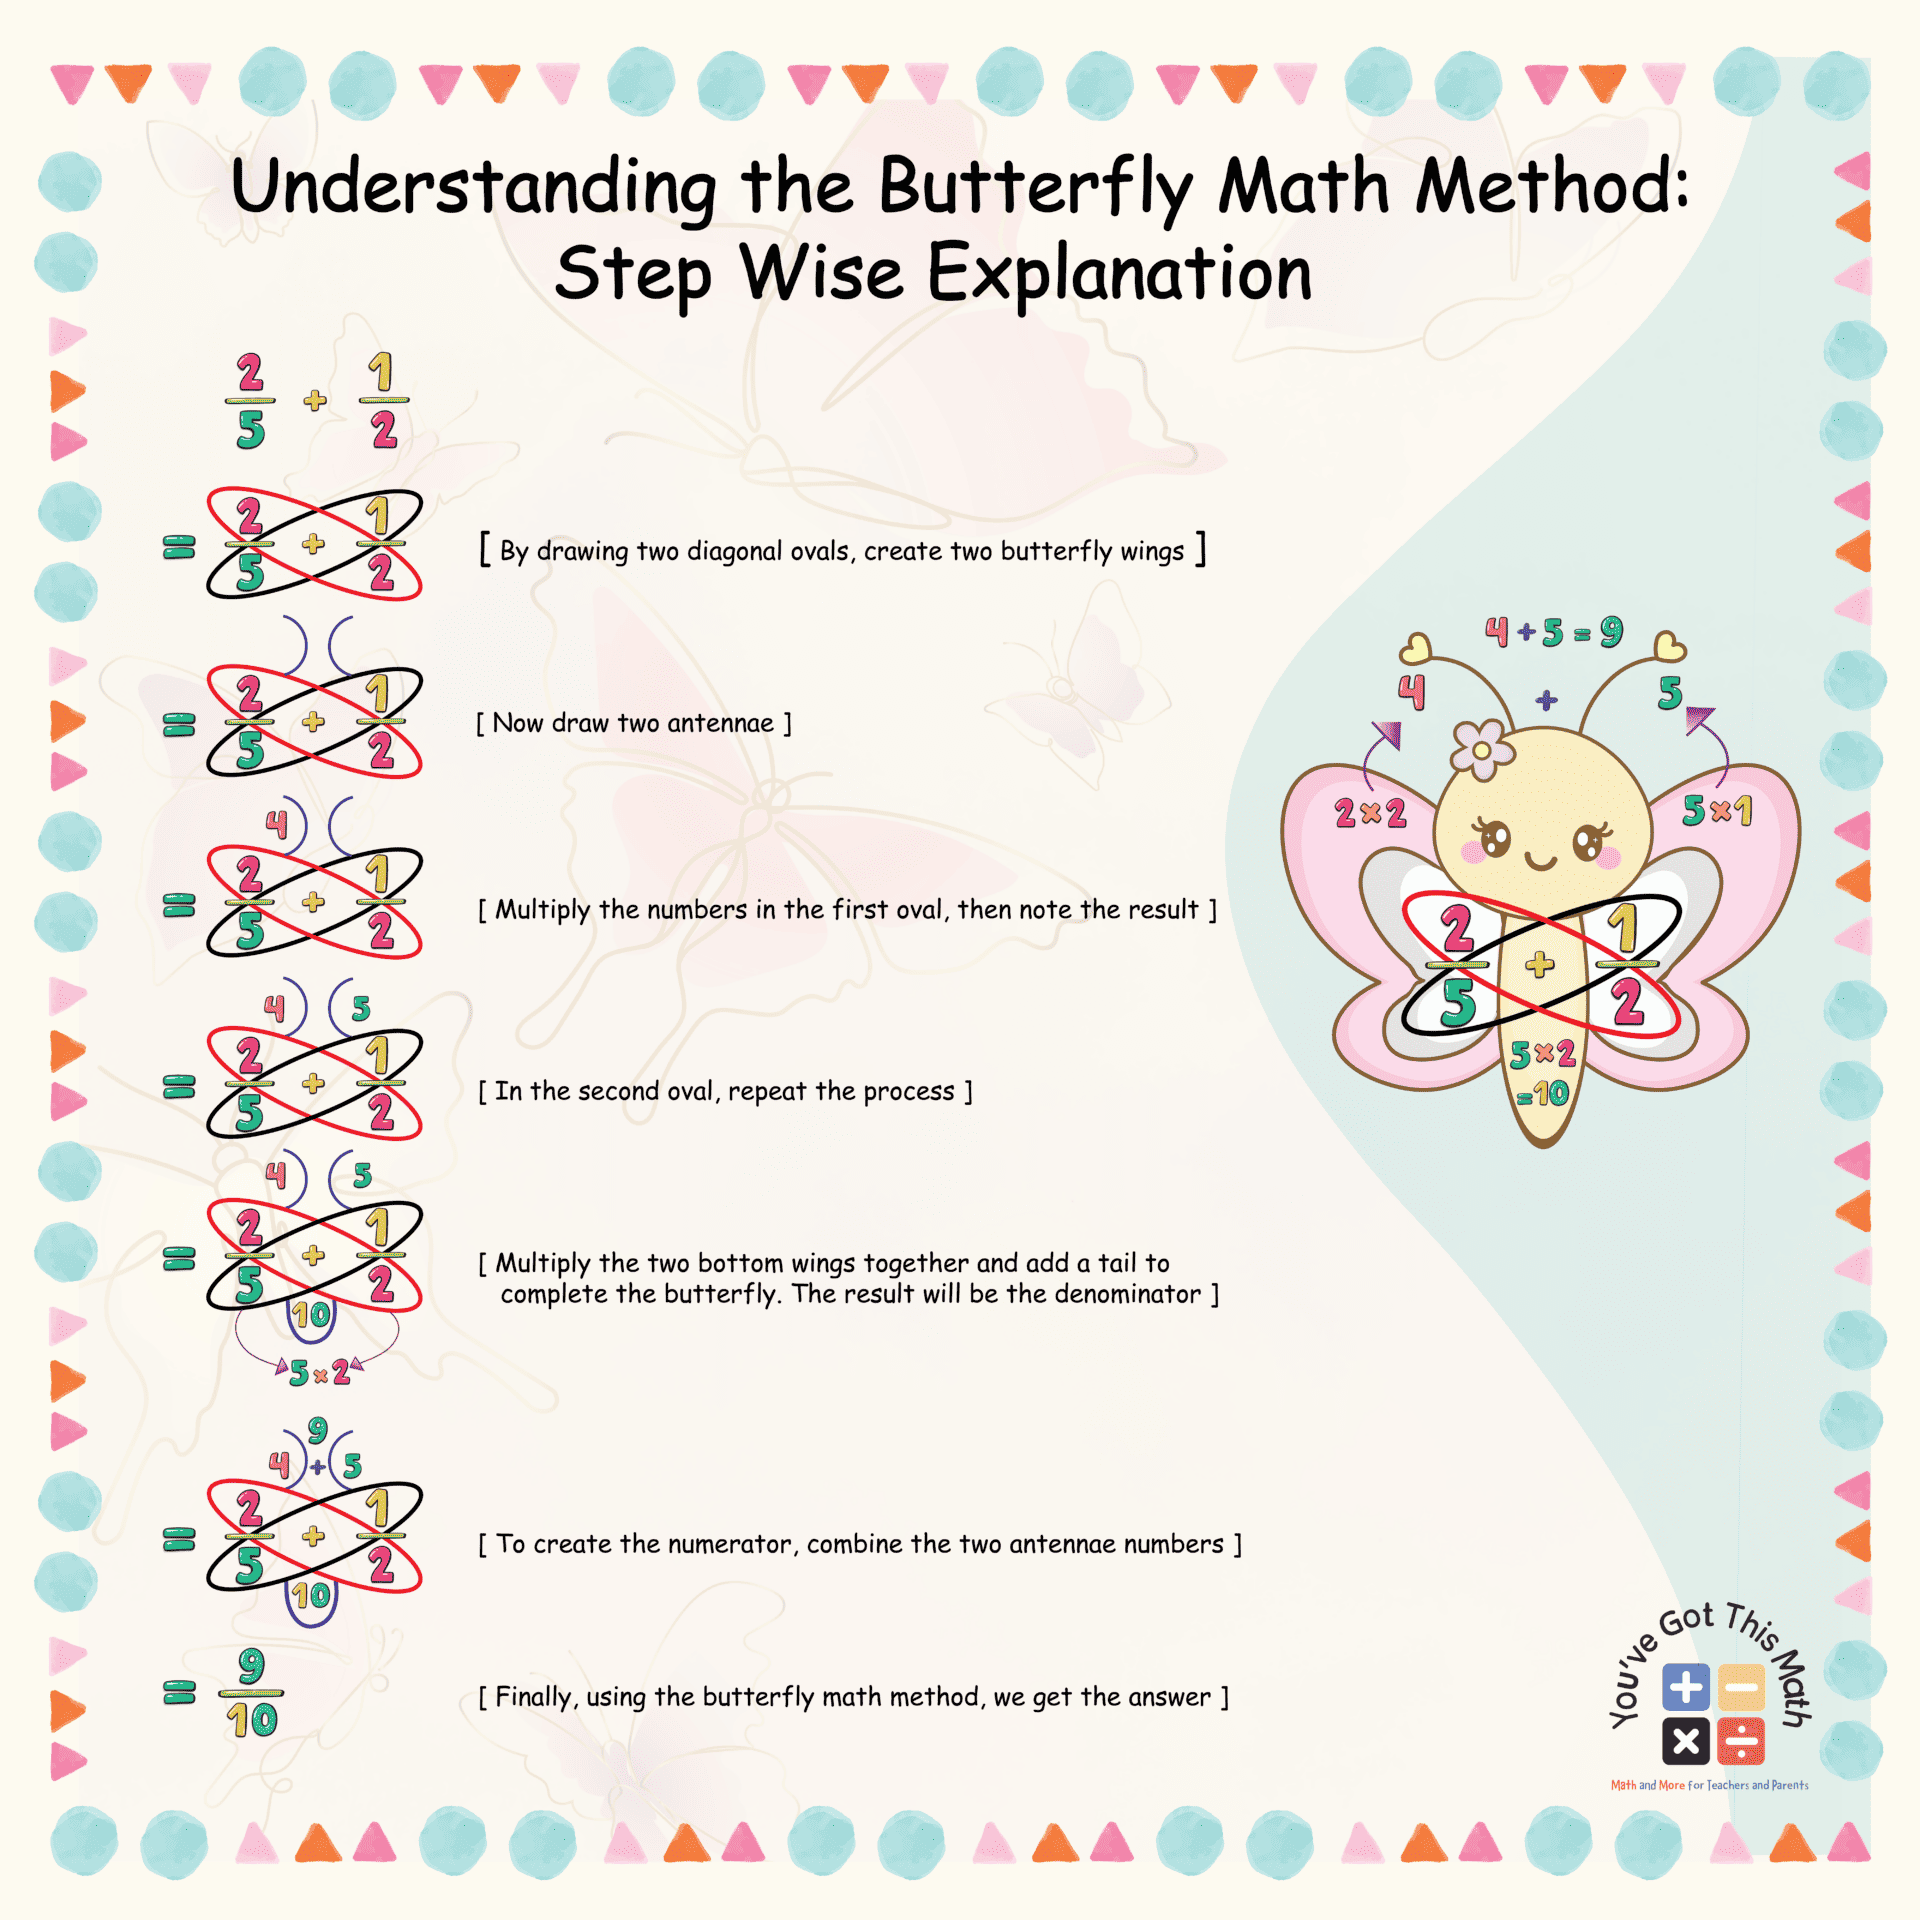 Understanding the Butterfly Math Method Step Wise Explanation